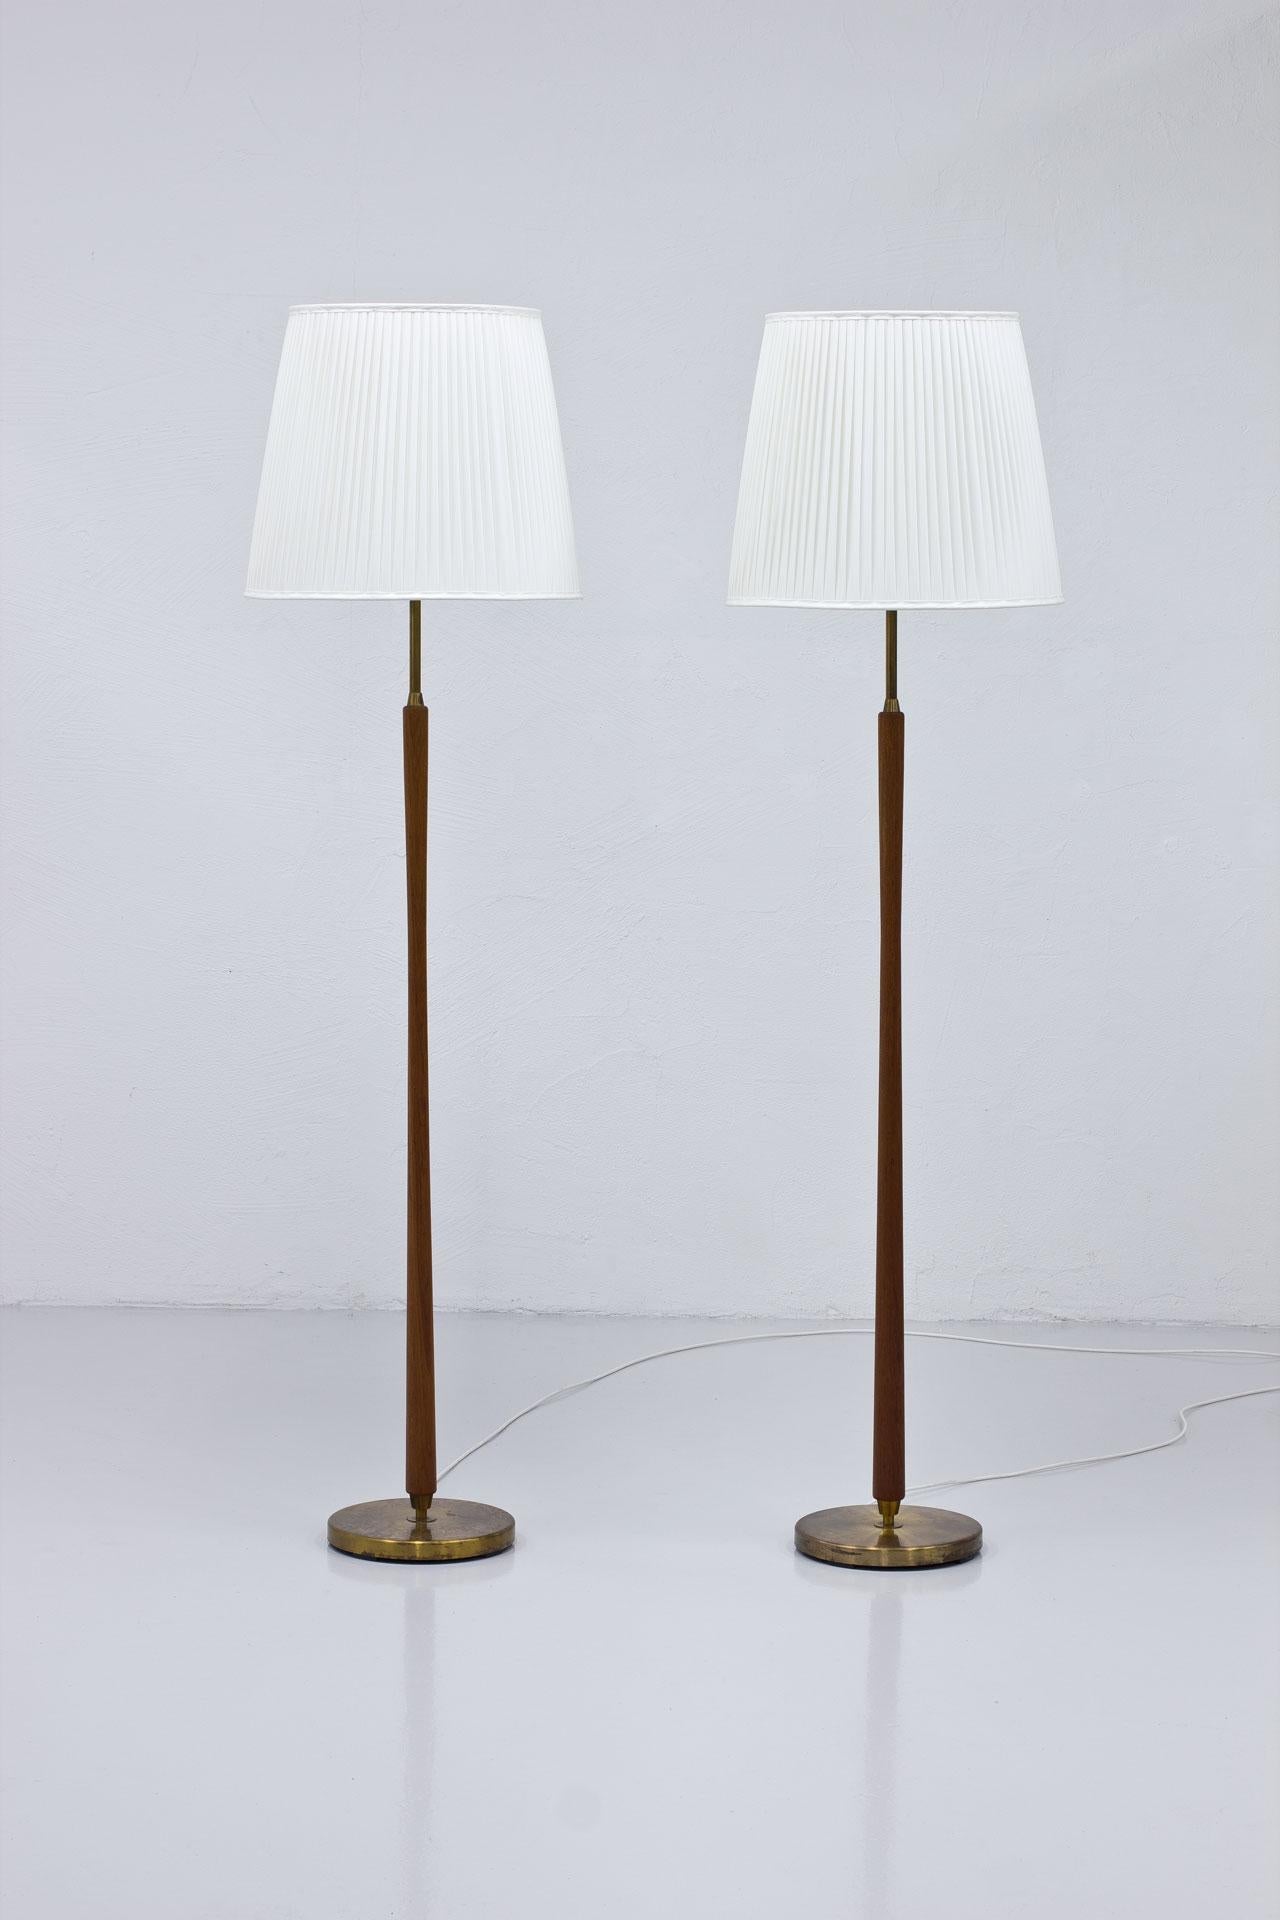 Pair of floor lamps manufactured by ASEA in Sweden during the 1940s-50s.
Made from brass with teak stem and new hand sewn shades in off-white chintz fabric. 
Four light bulbs on each lamp with two light switch. One uplight source, the others